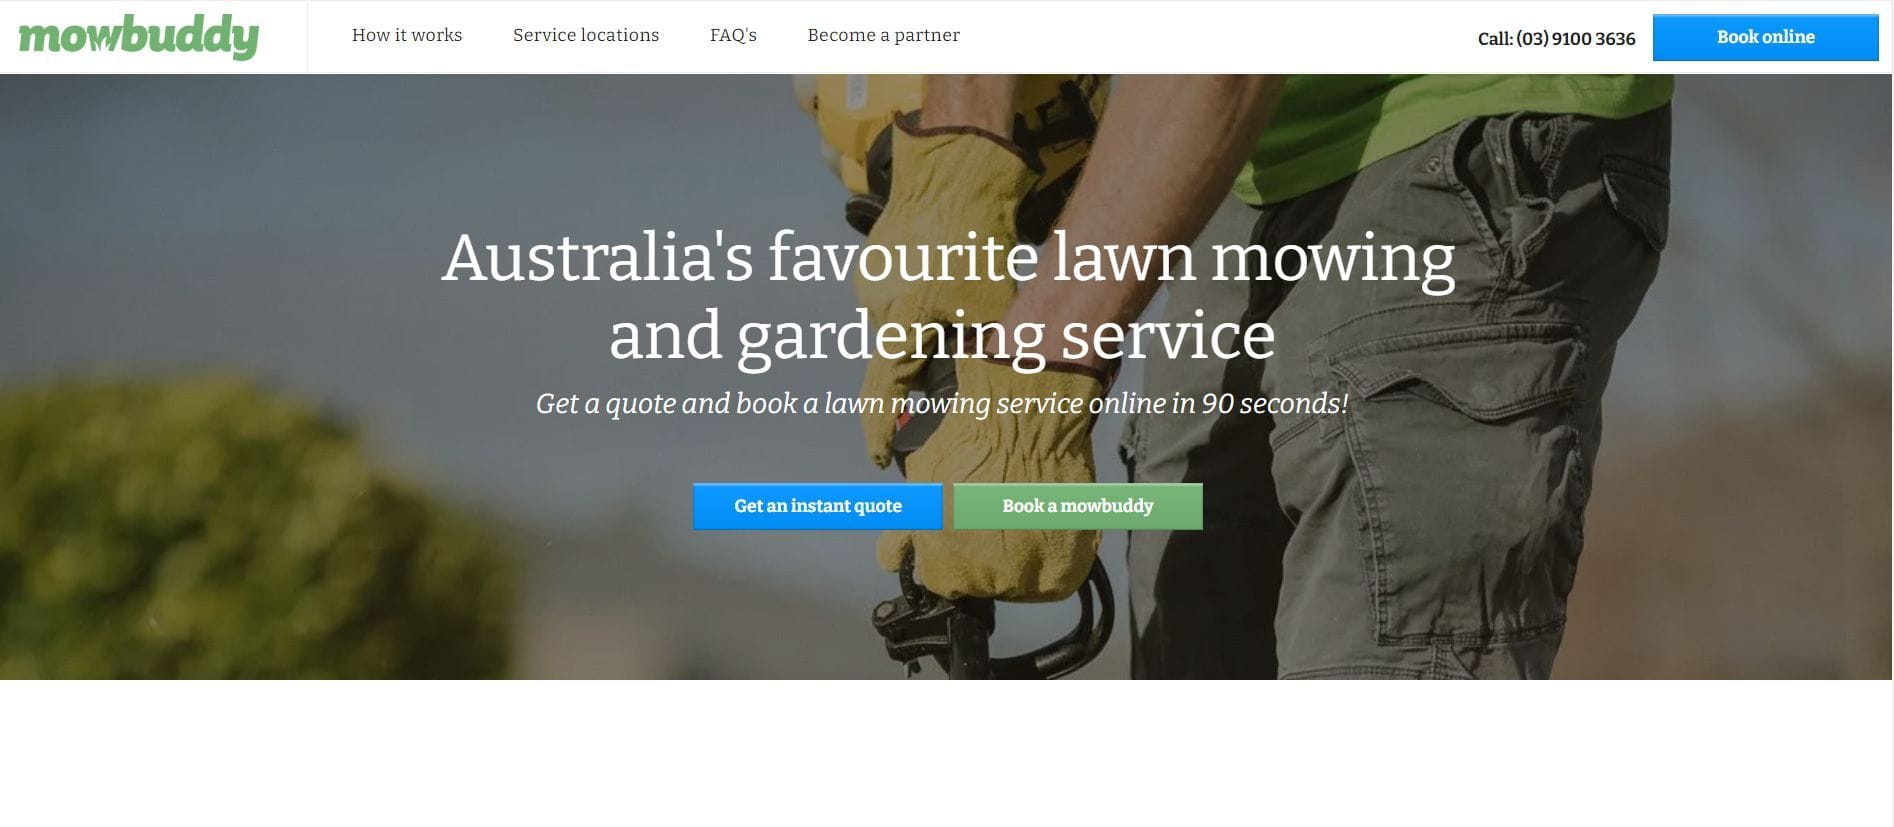 lawn mowing & gardening services melbourne. get quote & book online 2023 10 19 22 57 59